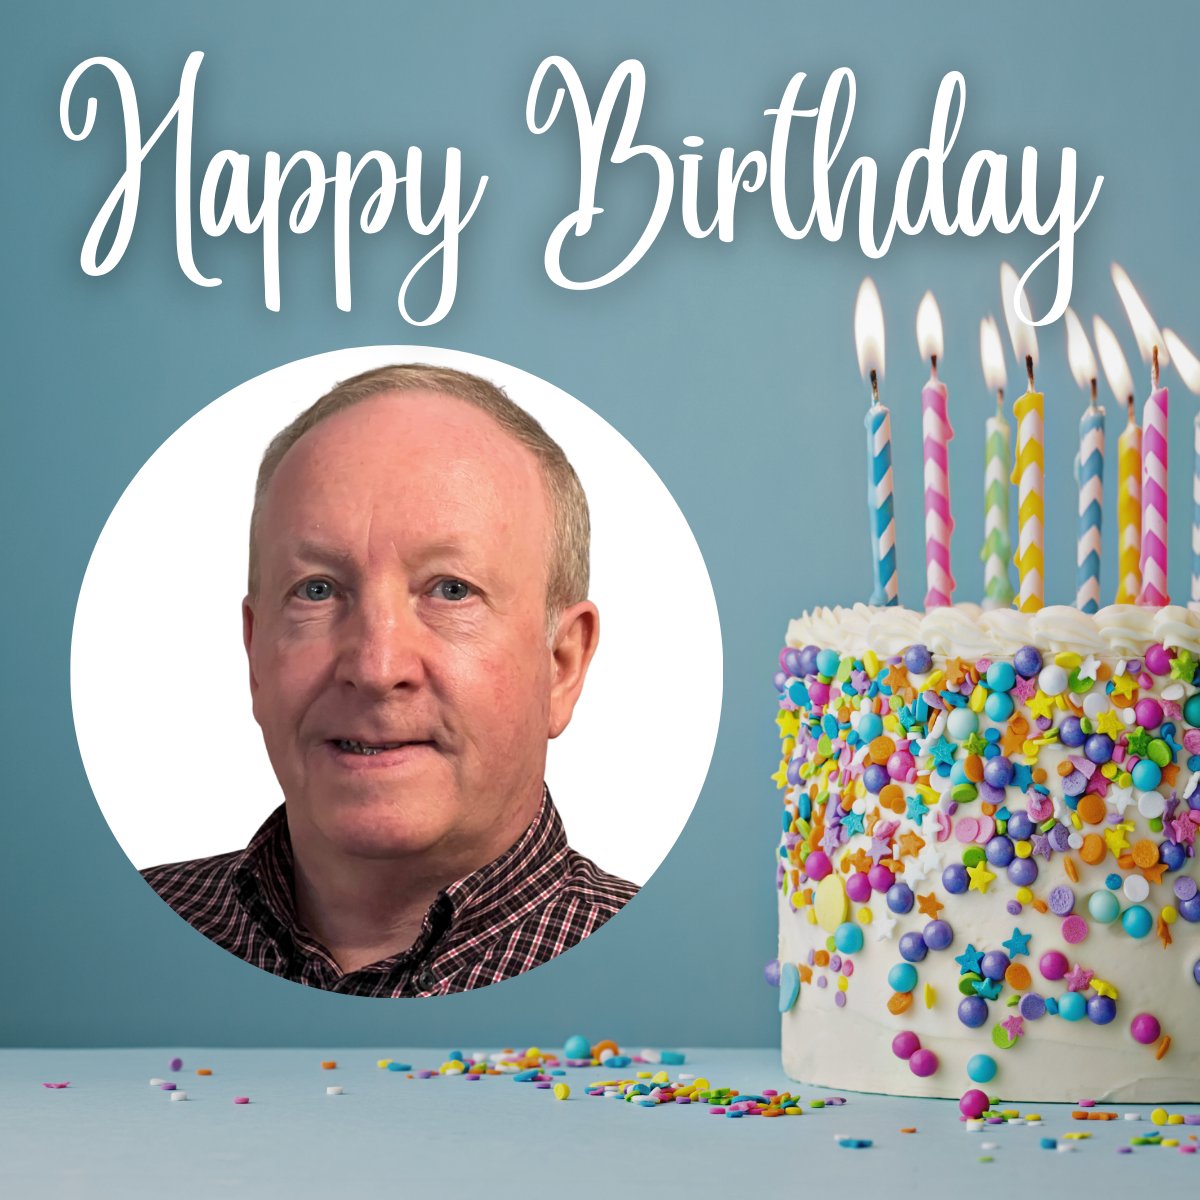 Roy, your dedication & hard work don't go unnoticed. Your fantastic blogs have been published an incredible 18 times in 12 different publications - Thanks for sharing your expertise with us. Let's all join in wishing Roy a big Happy Birthday 🎉🎂